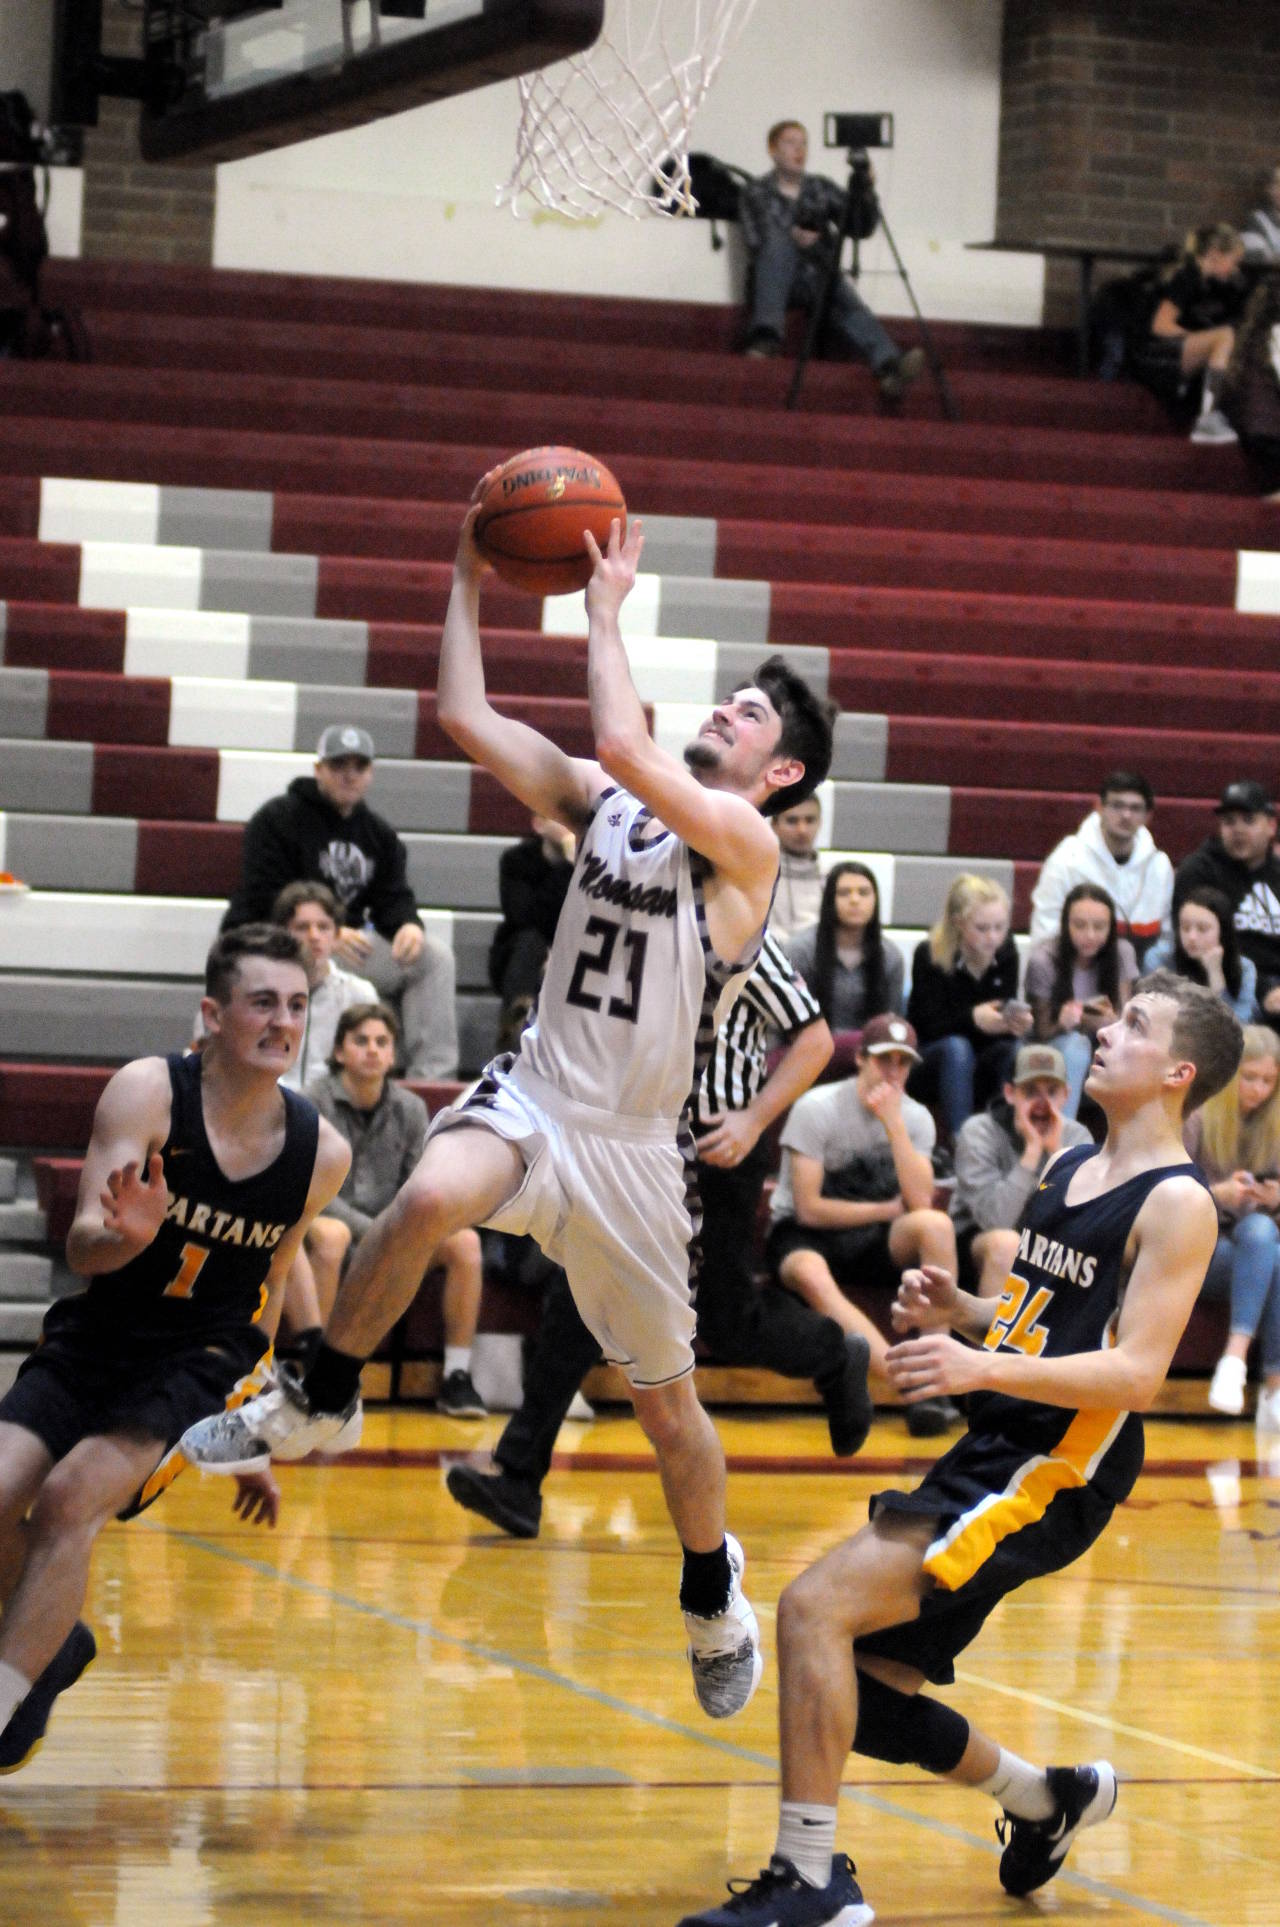 Montesano’s Colby Adams drives to the hoop during the Bulldogs’ 47-33 victory over Forks on Thursday in Montesano. (Ryan Sparks | Grays Harbor News Group)